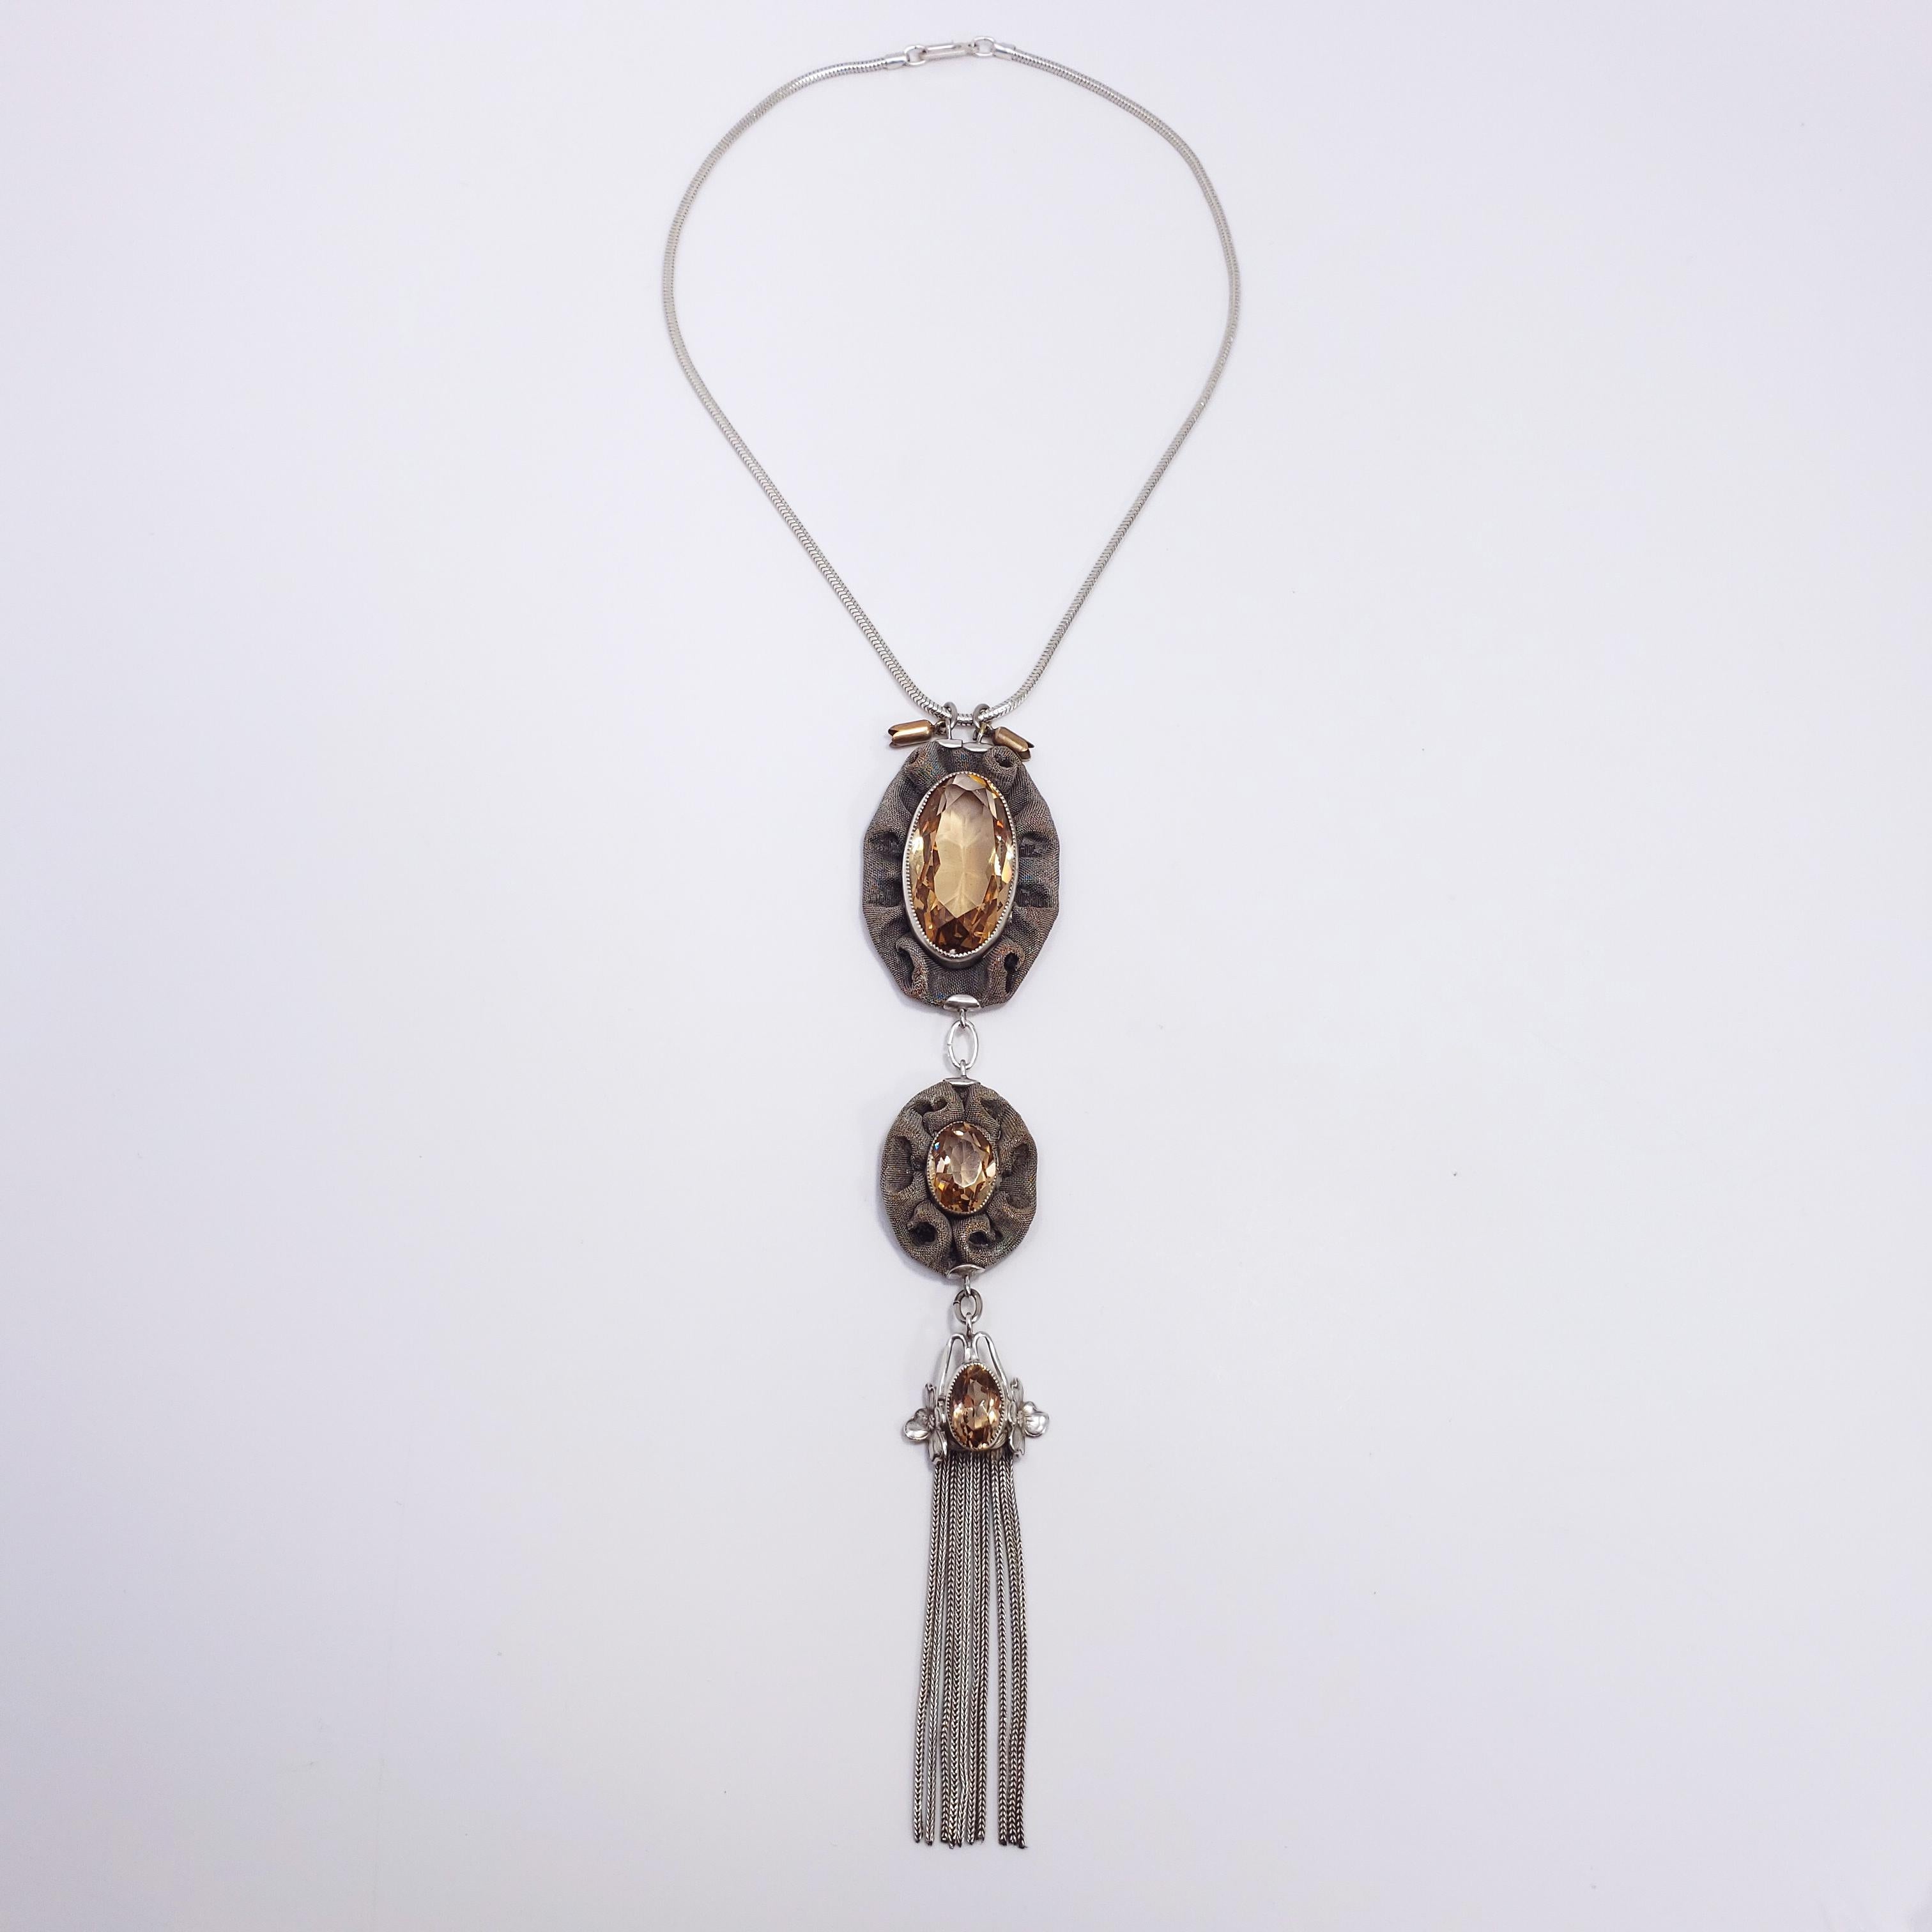 A handmade Victorian-era statement necklace. Three drop pendants hang in sequence on a snake chain. Each features an elongated, open back, champagne/topaz colored crystal set in a sawtooth bezel. Two of the pendants are set in a decorative sterling